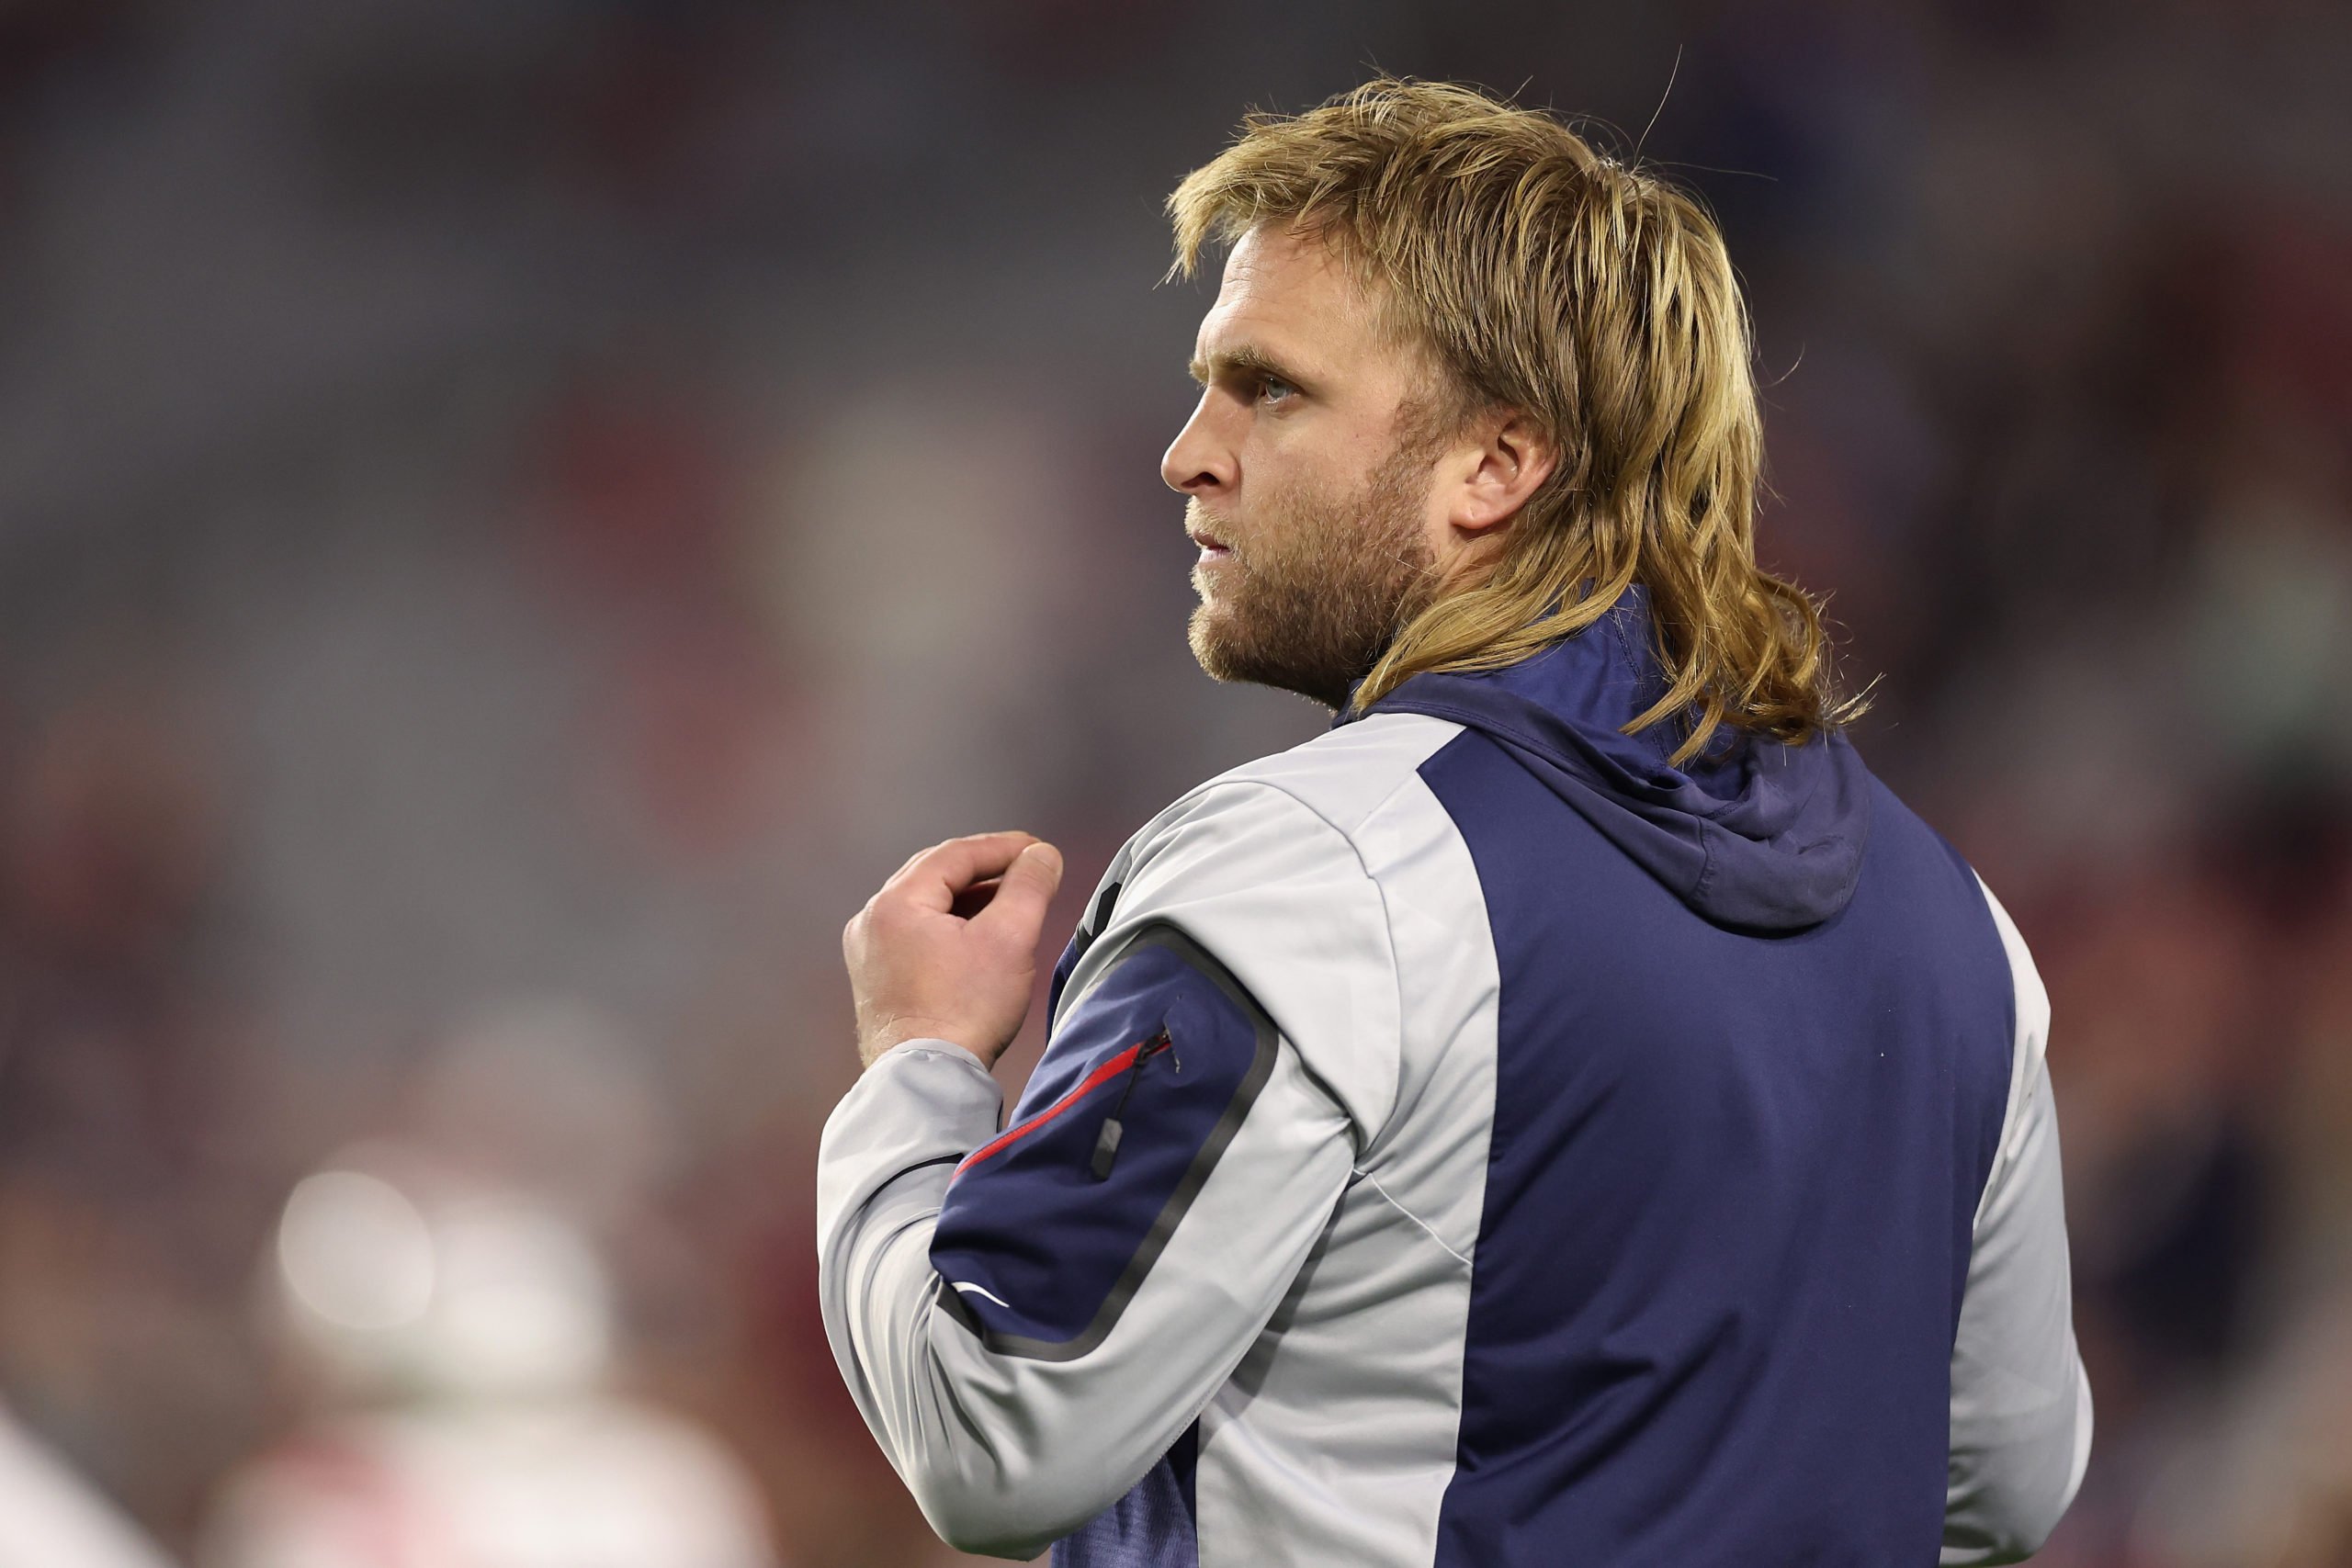 GLENDALE, ARIZONA - DECEMBER 12: Linebackers coach Steve Belichick of the New England Patriots during the NFL game at State Farm Stadium on December 12, 2022 in Glendale, Arizona. The Patriots defeated the Cardinals 27-13. Christian Petersen/Getty Images